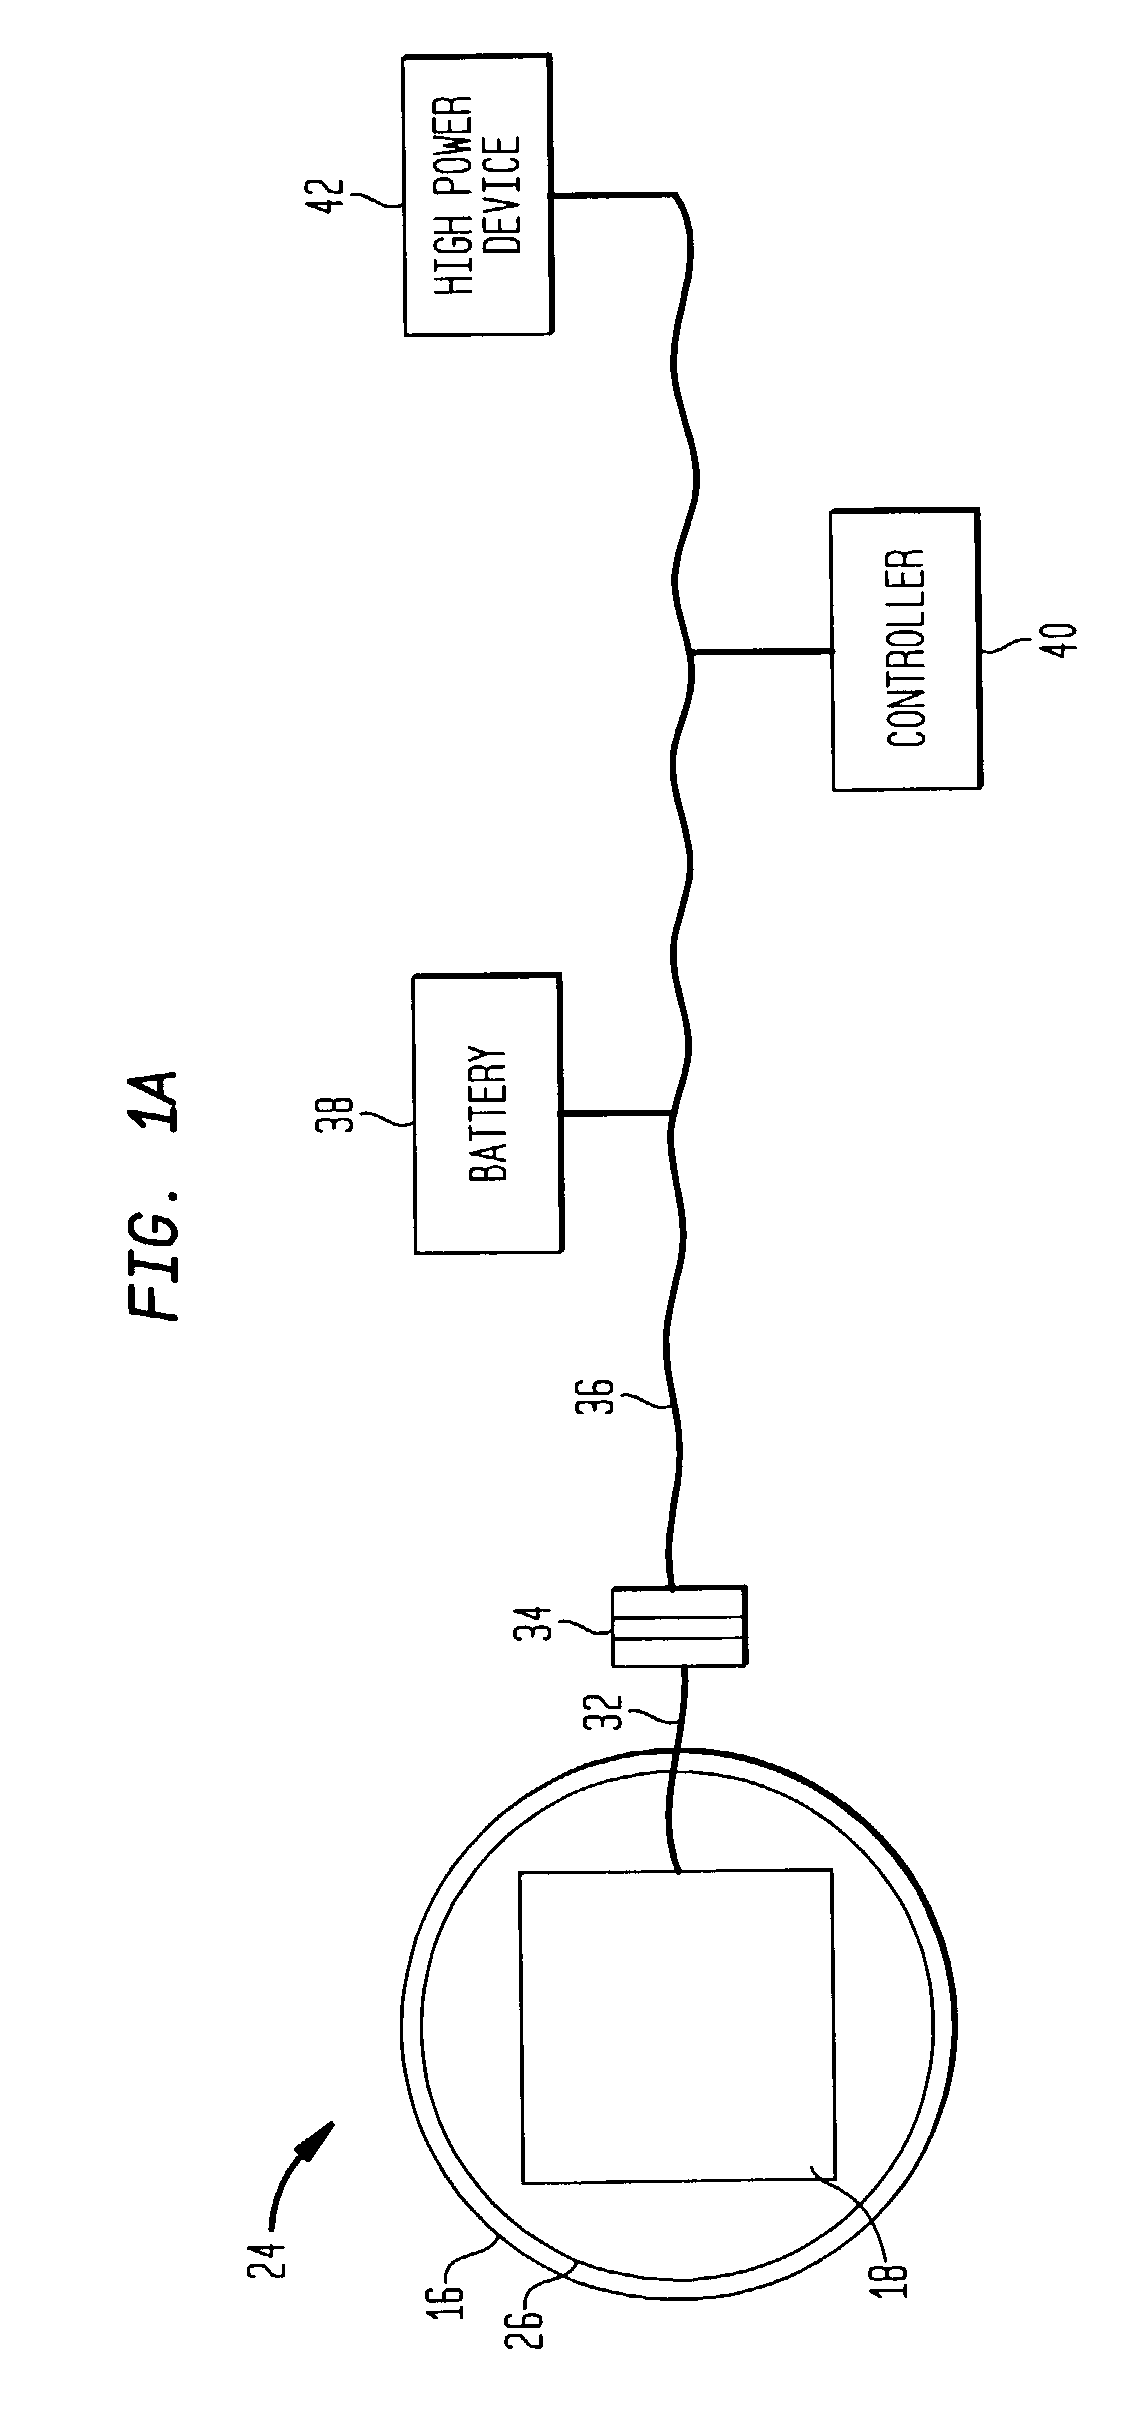 Transcutaneous energy transfer module with integrated conversion circuitry